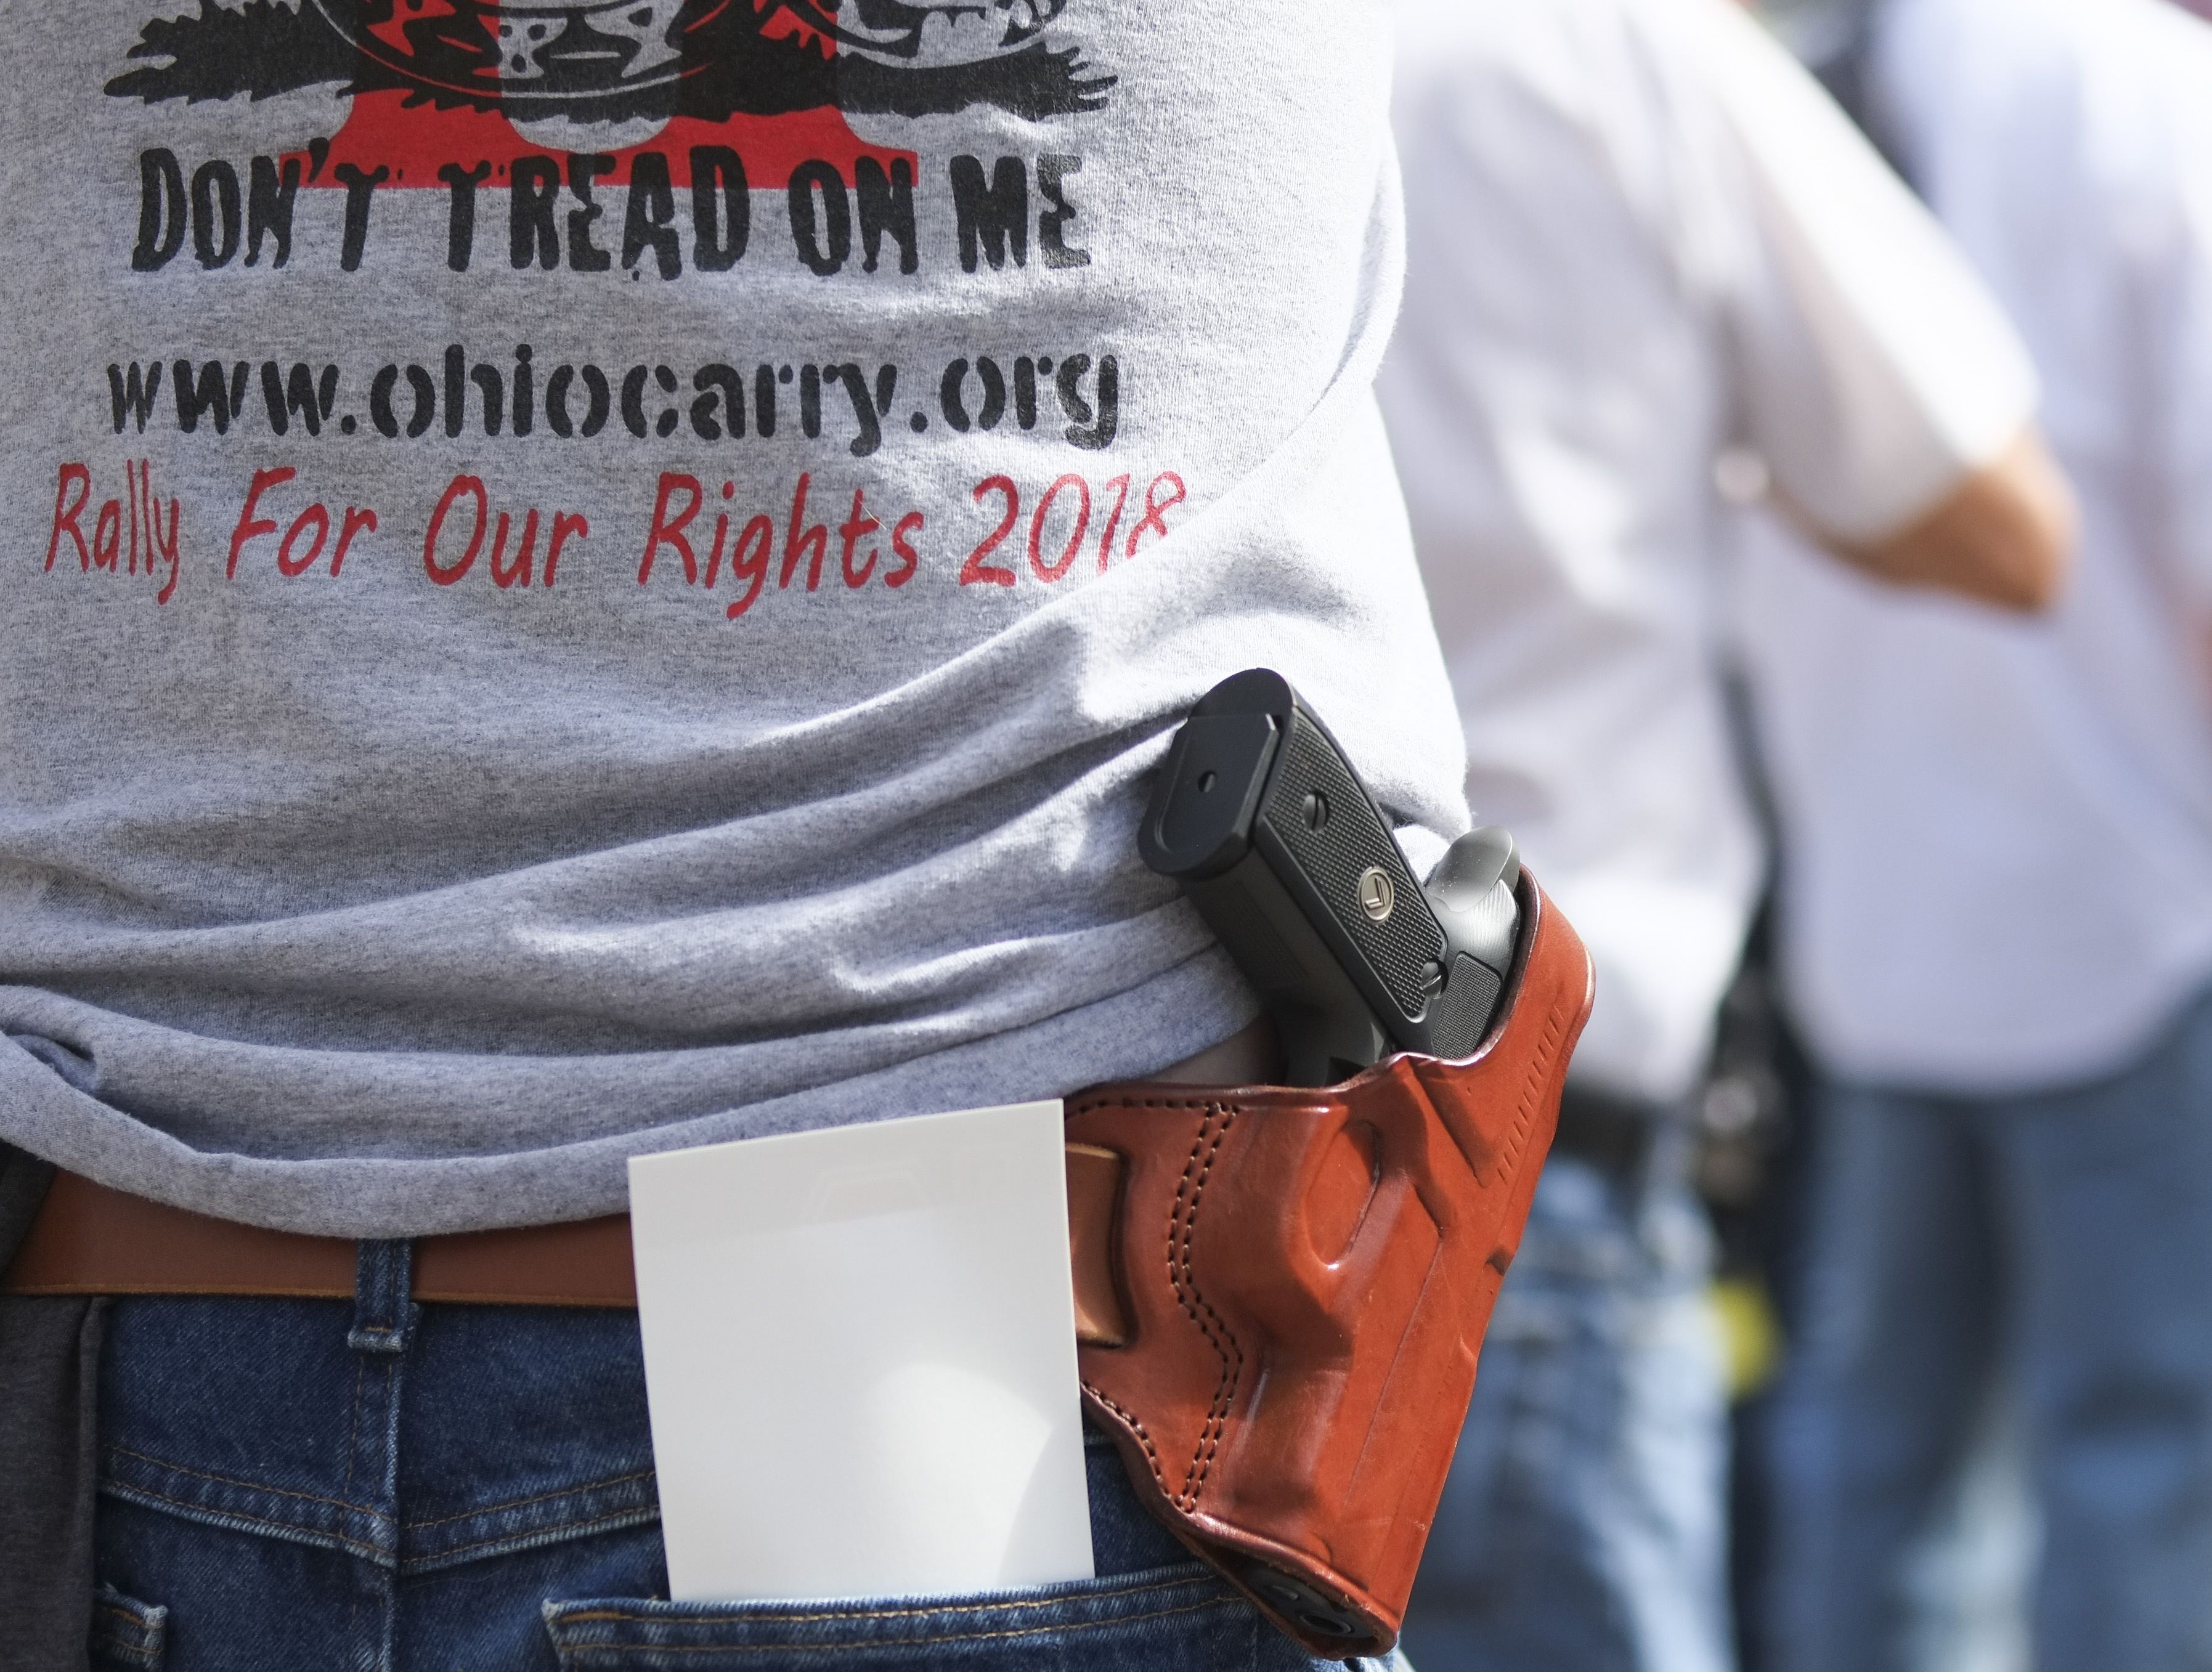 Gun owners and second amendment advocates gather at the Ohio State House to protest gun control legislation. Photo: AFP